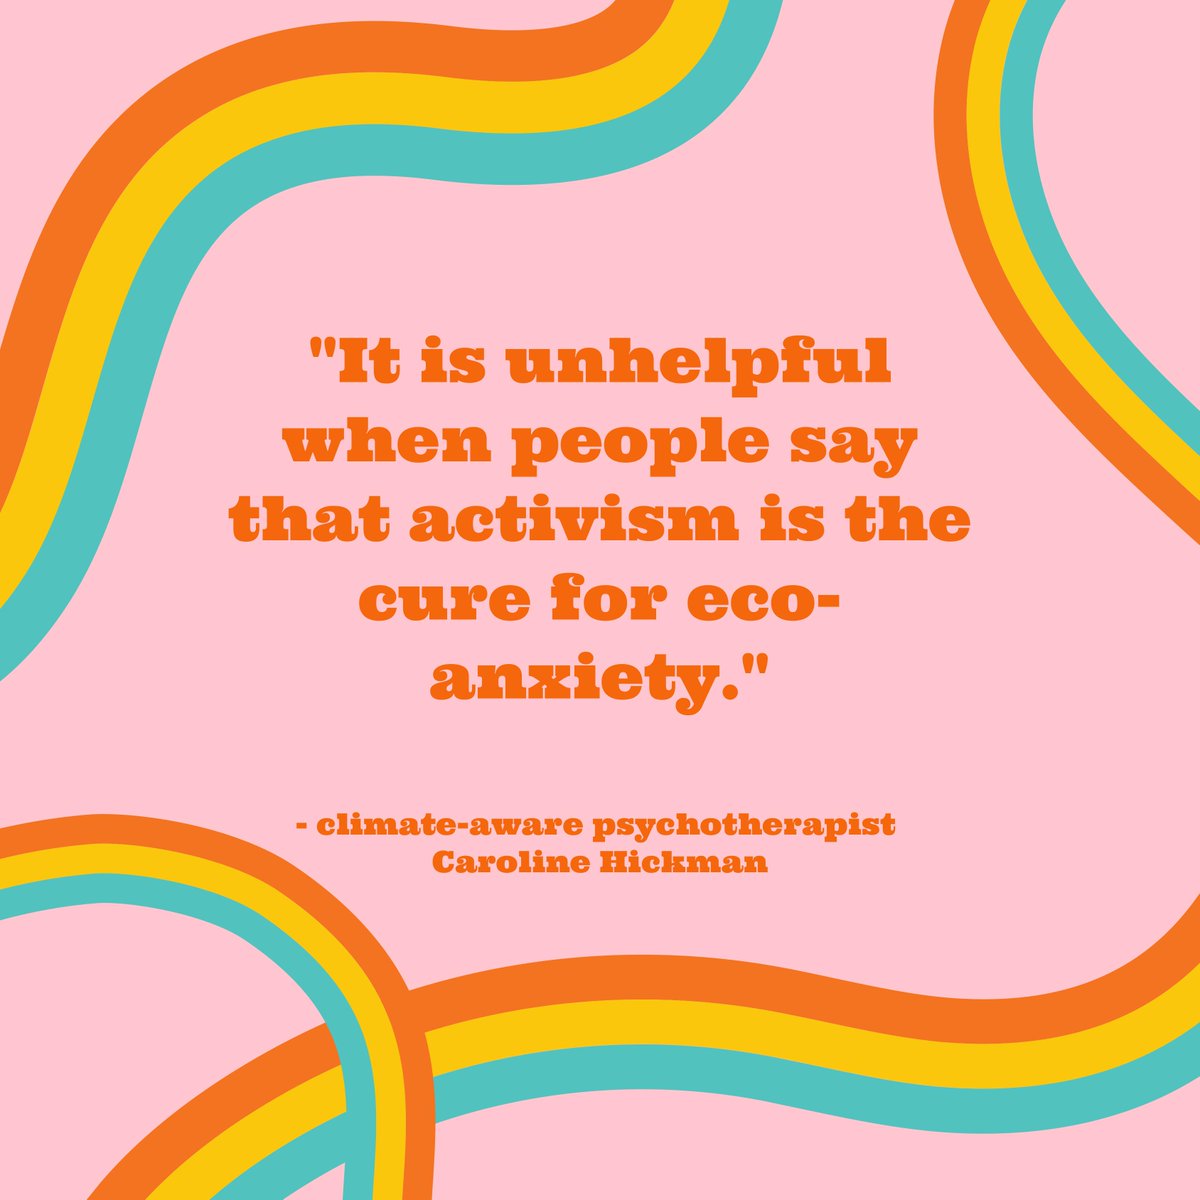 As  #ecoanxiety and  #ecogrief have taken hold of society in new ways over the last few years, the tendency to prescribe activism as a tool to beat the feelings back has grown. But climate-aware psychotherapist  @Carolinehickma argues there’s a danger lurking in that sentiment.